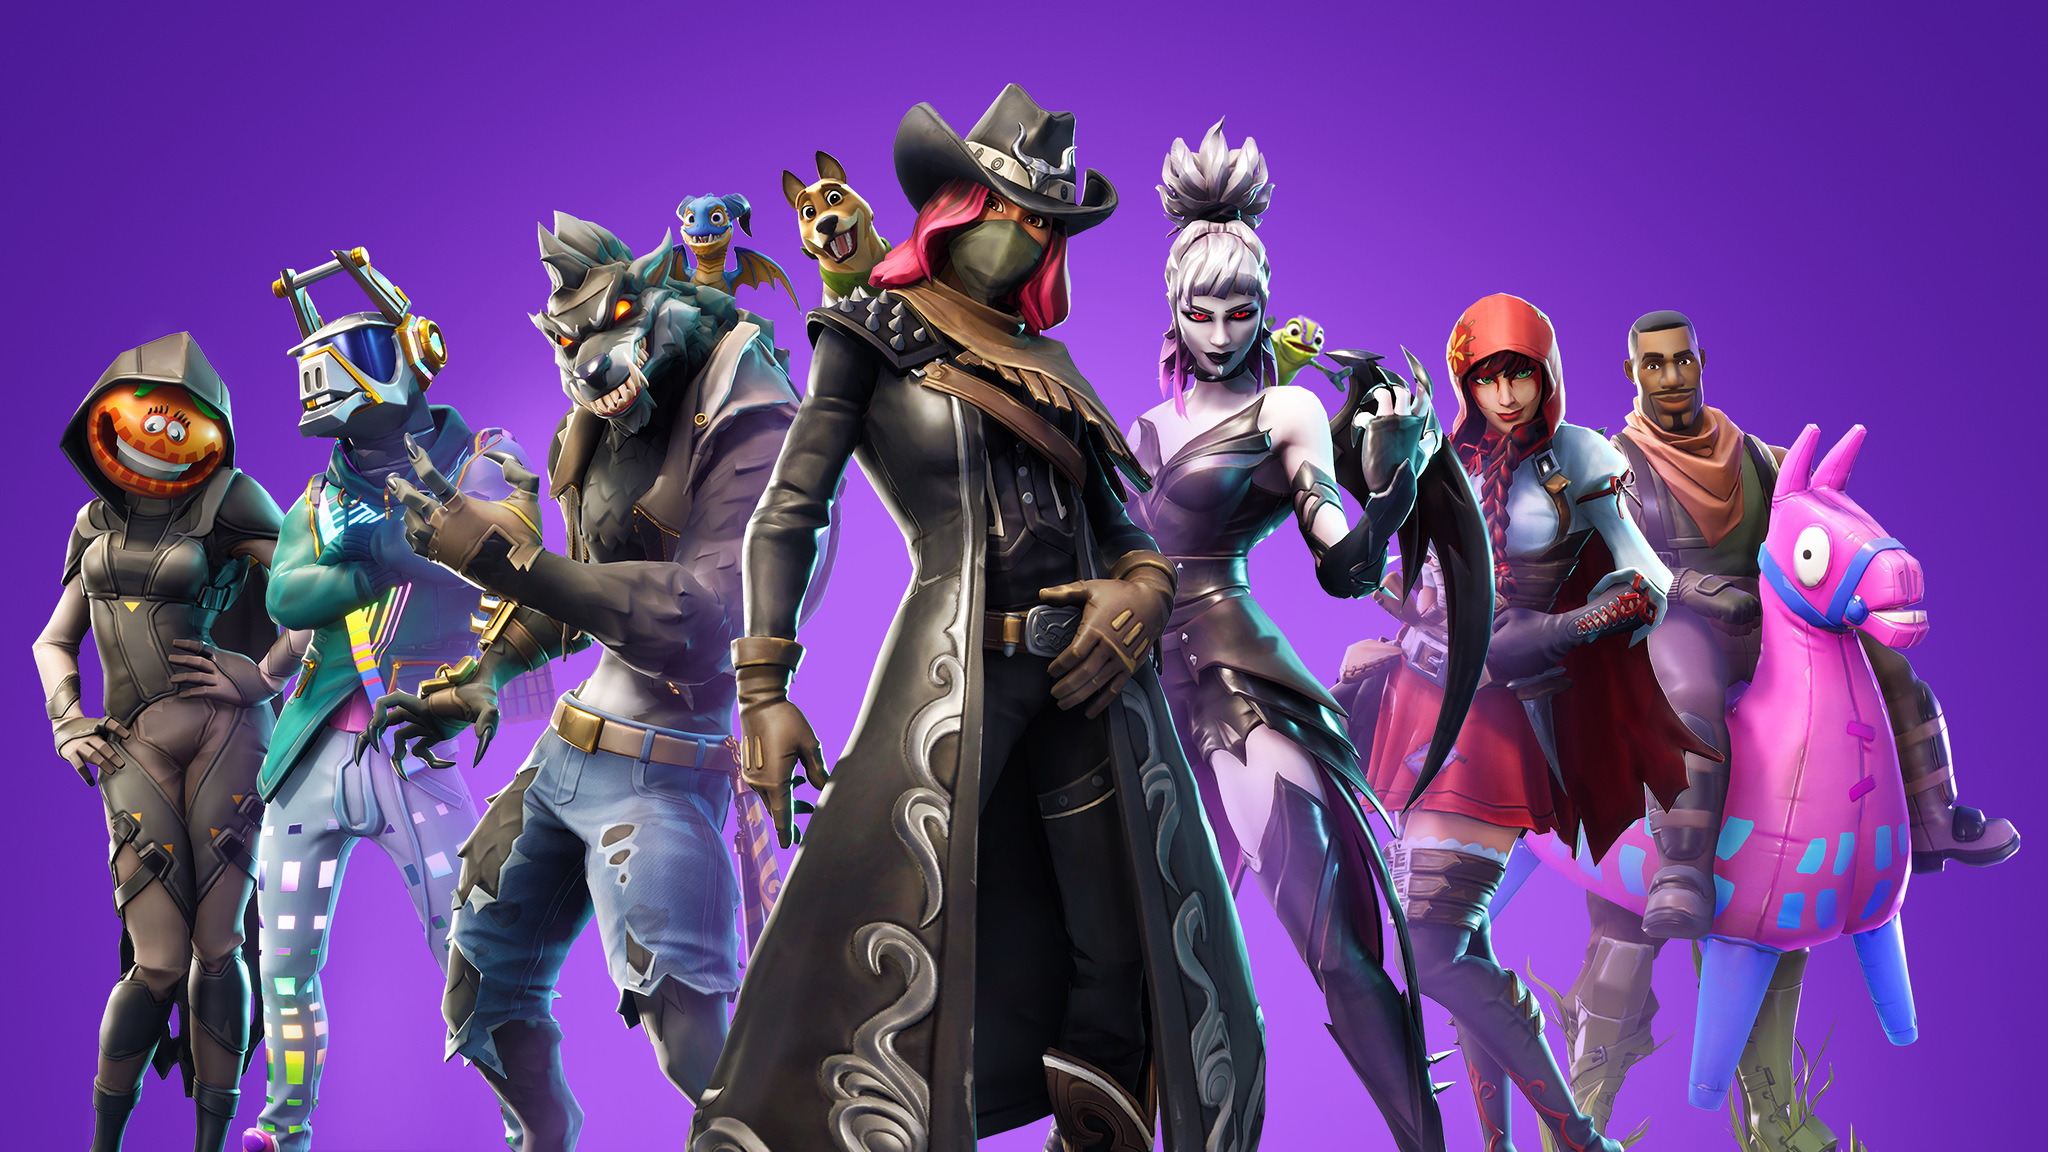 Free Download 2048x1152 Fortnite Season 6 2048x1152 Resolution Hd 4k Wallpapers 2048x1152 For Your Desktop Mobile Tablet Explore 32 Fortnite Season 6 Wallpapers Fortnite Season 6 Wallpapers Fortnite 6 Wallpapers Lost Season 6 Wallpaper